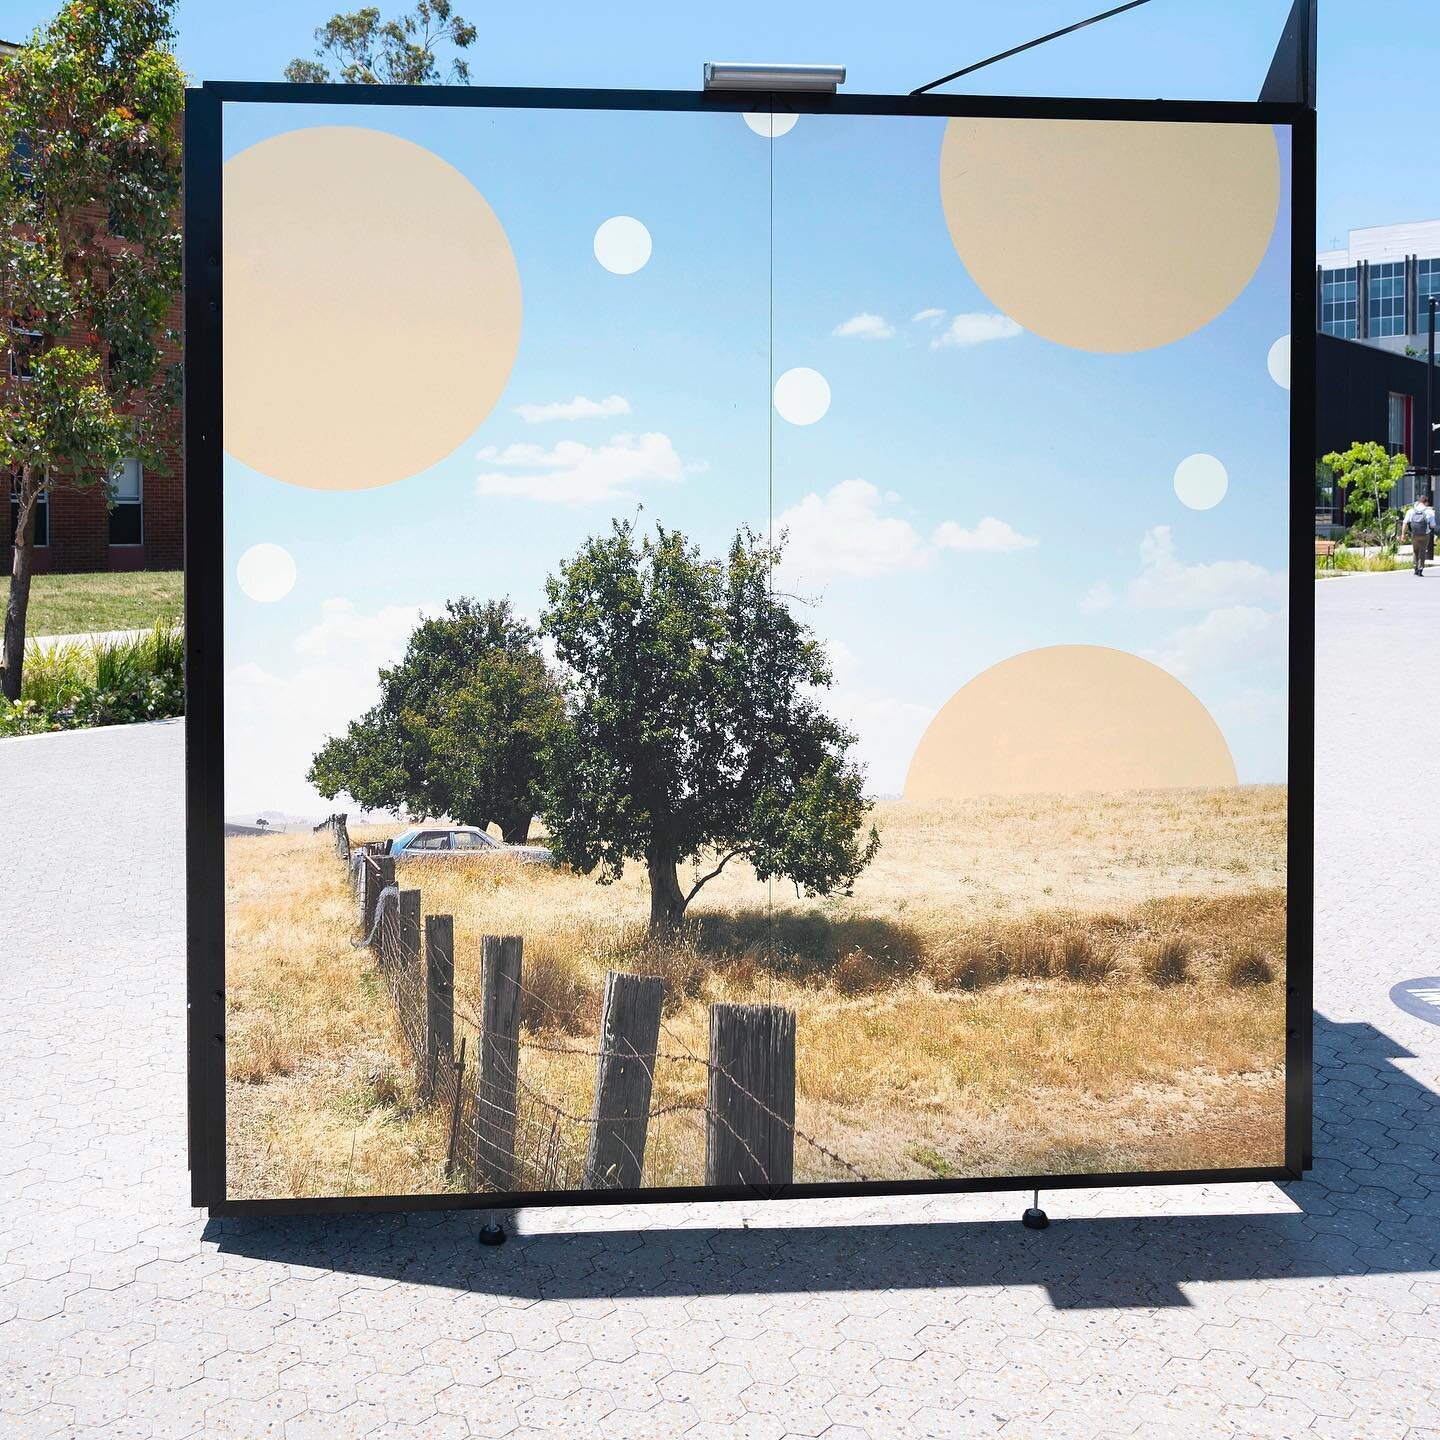 THE. ART. OUTDOORS.
@ambushgallery&rsquo;s HERE I AM: Art by Great Women festival is inspired by the Know My Name movement in cultural partnership with the @nationalgalleryaus. My artwork THE SLOWDOWN is one of the many large scale pieces that make u